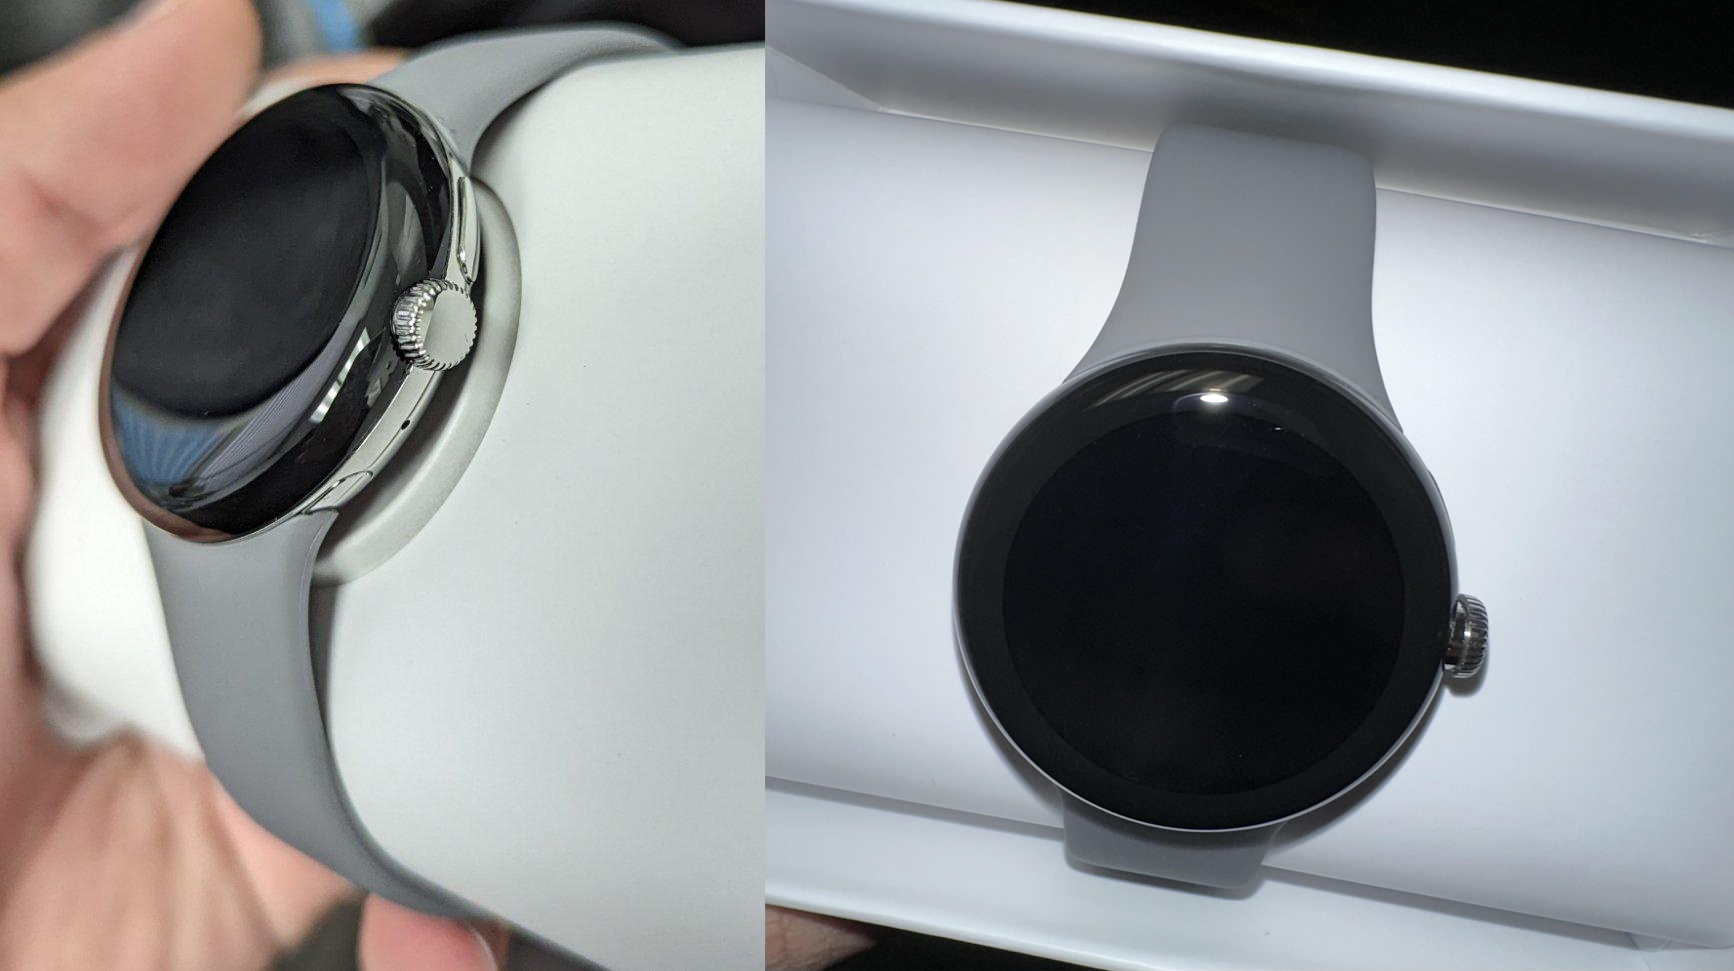 Early Pixel leak online Watch unboxing images